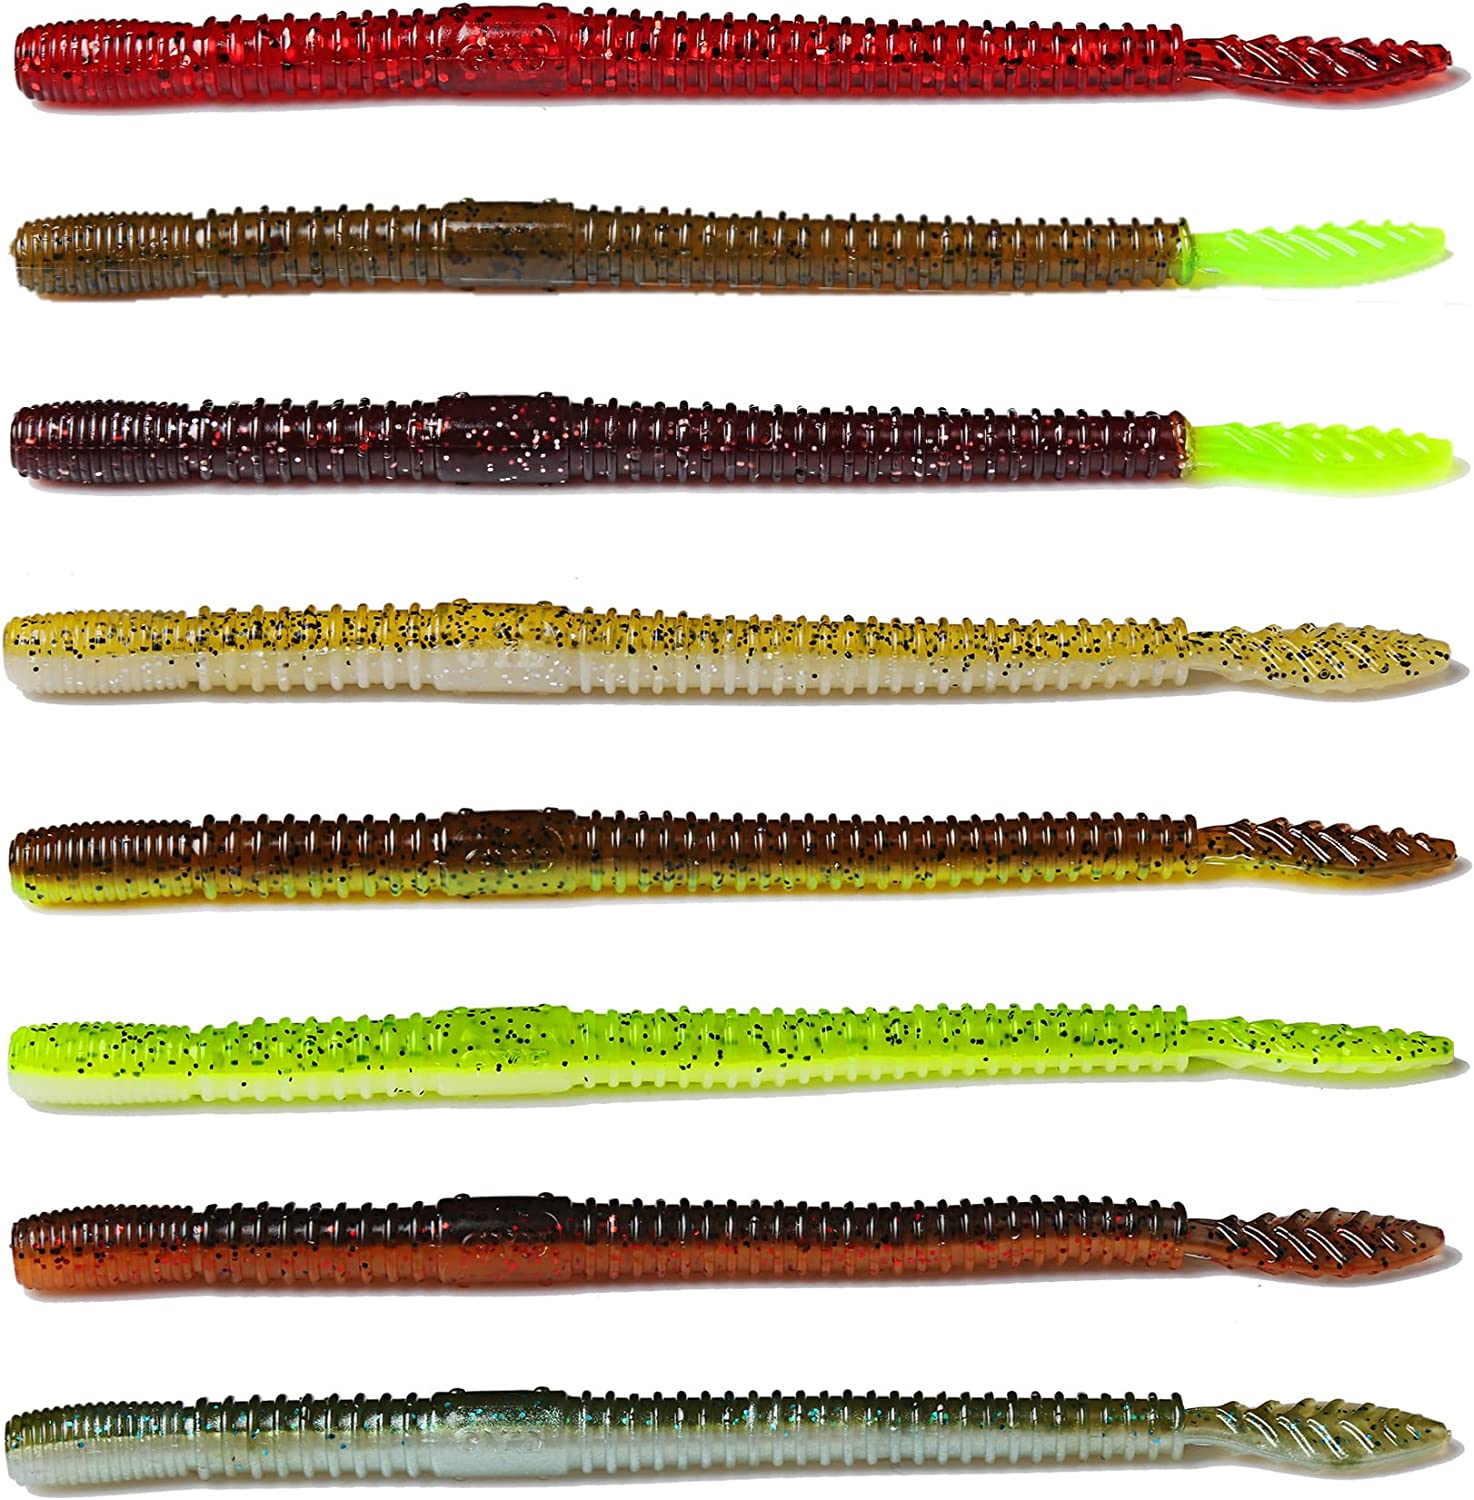 plastic worms with various colors